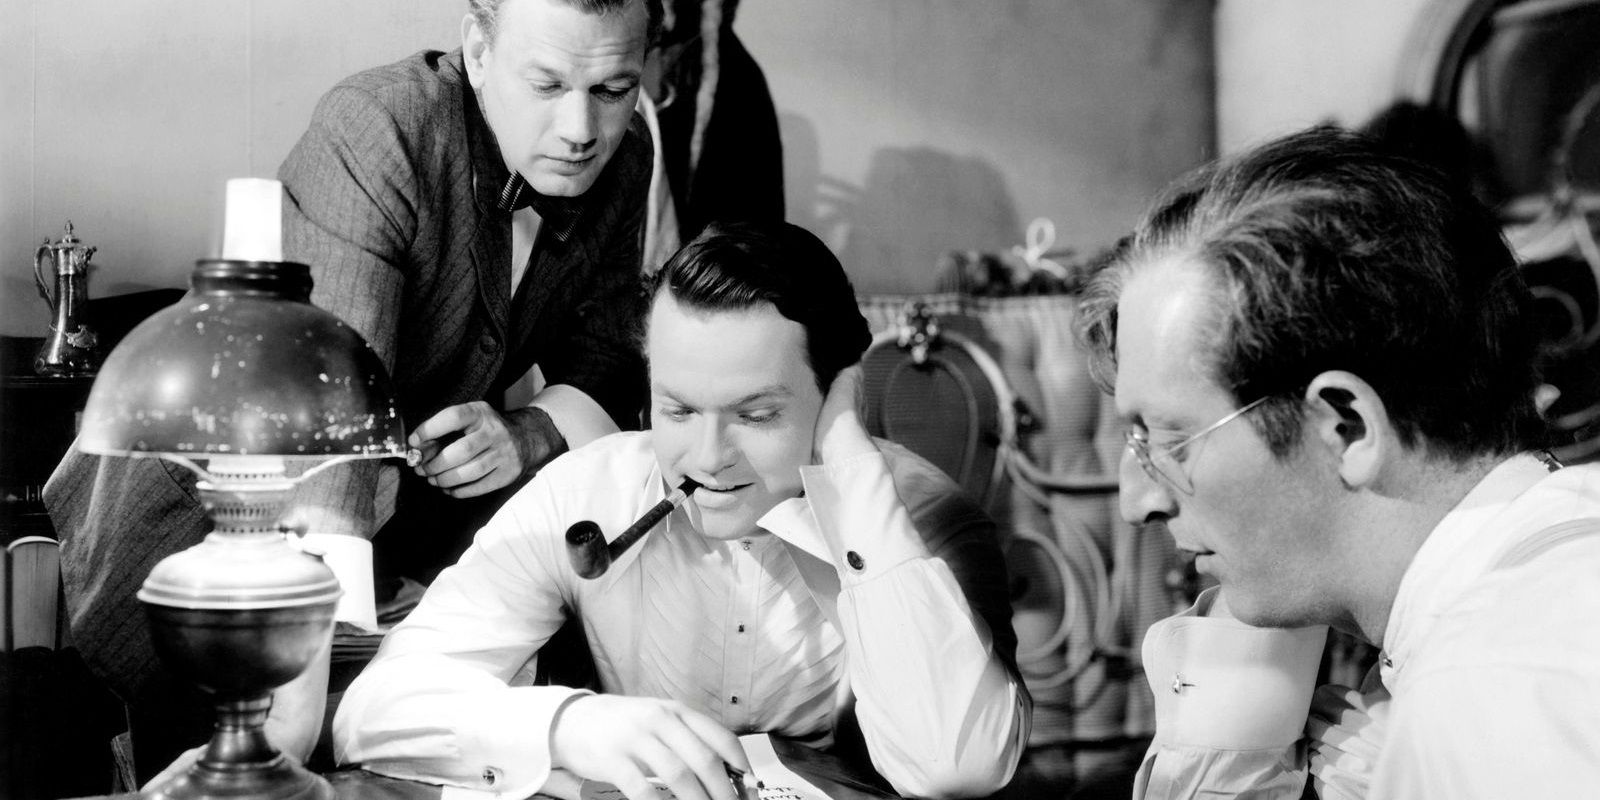 Kane working on a story in Citizen Kane